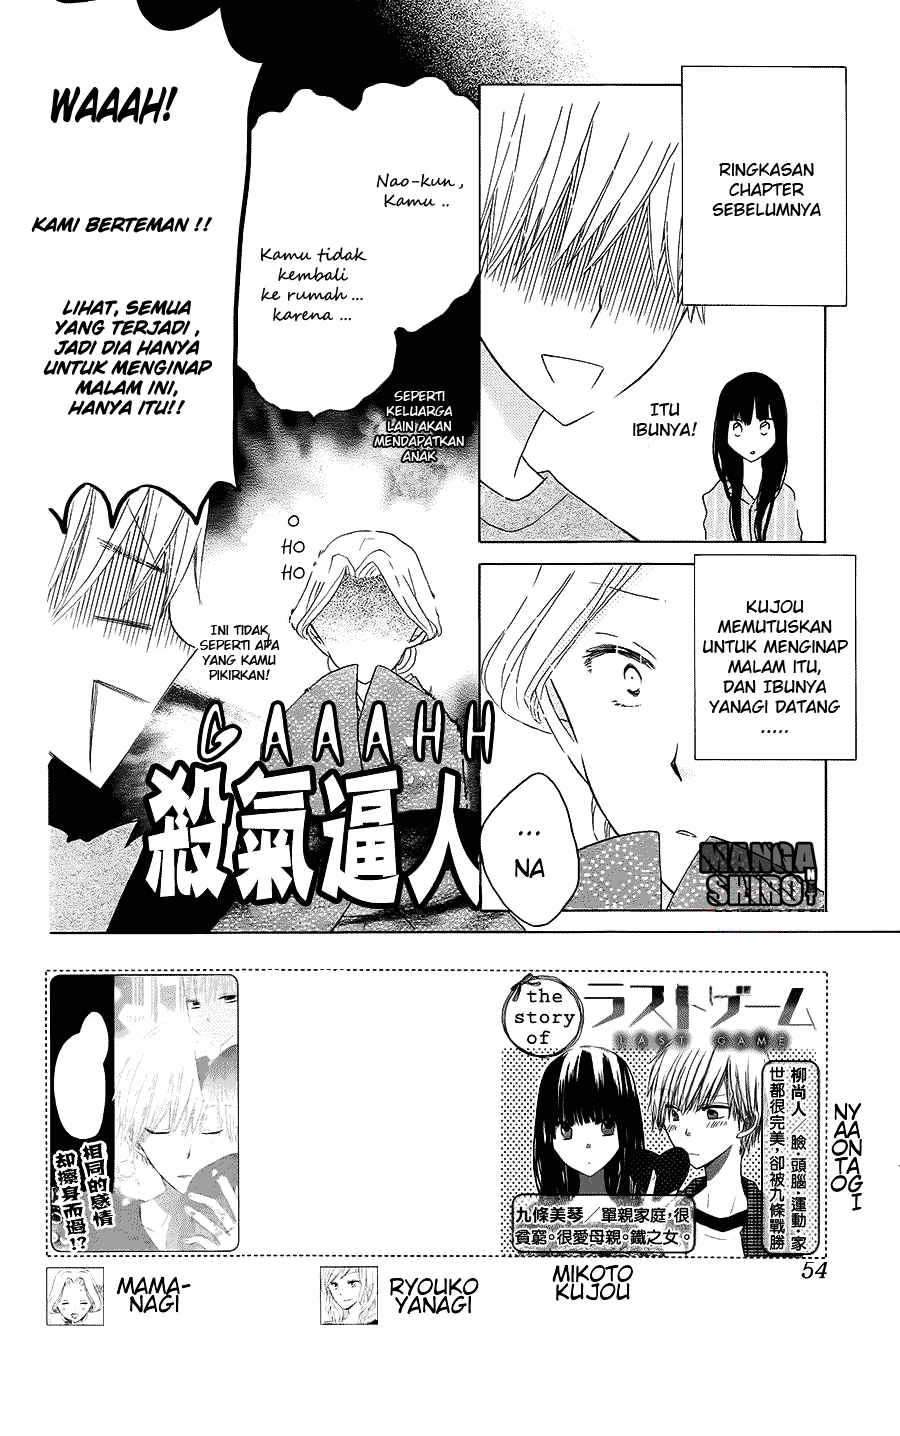 Last Game Chapter 43